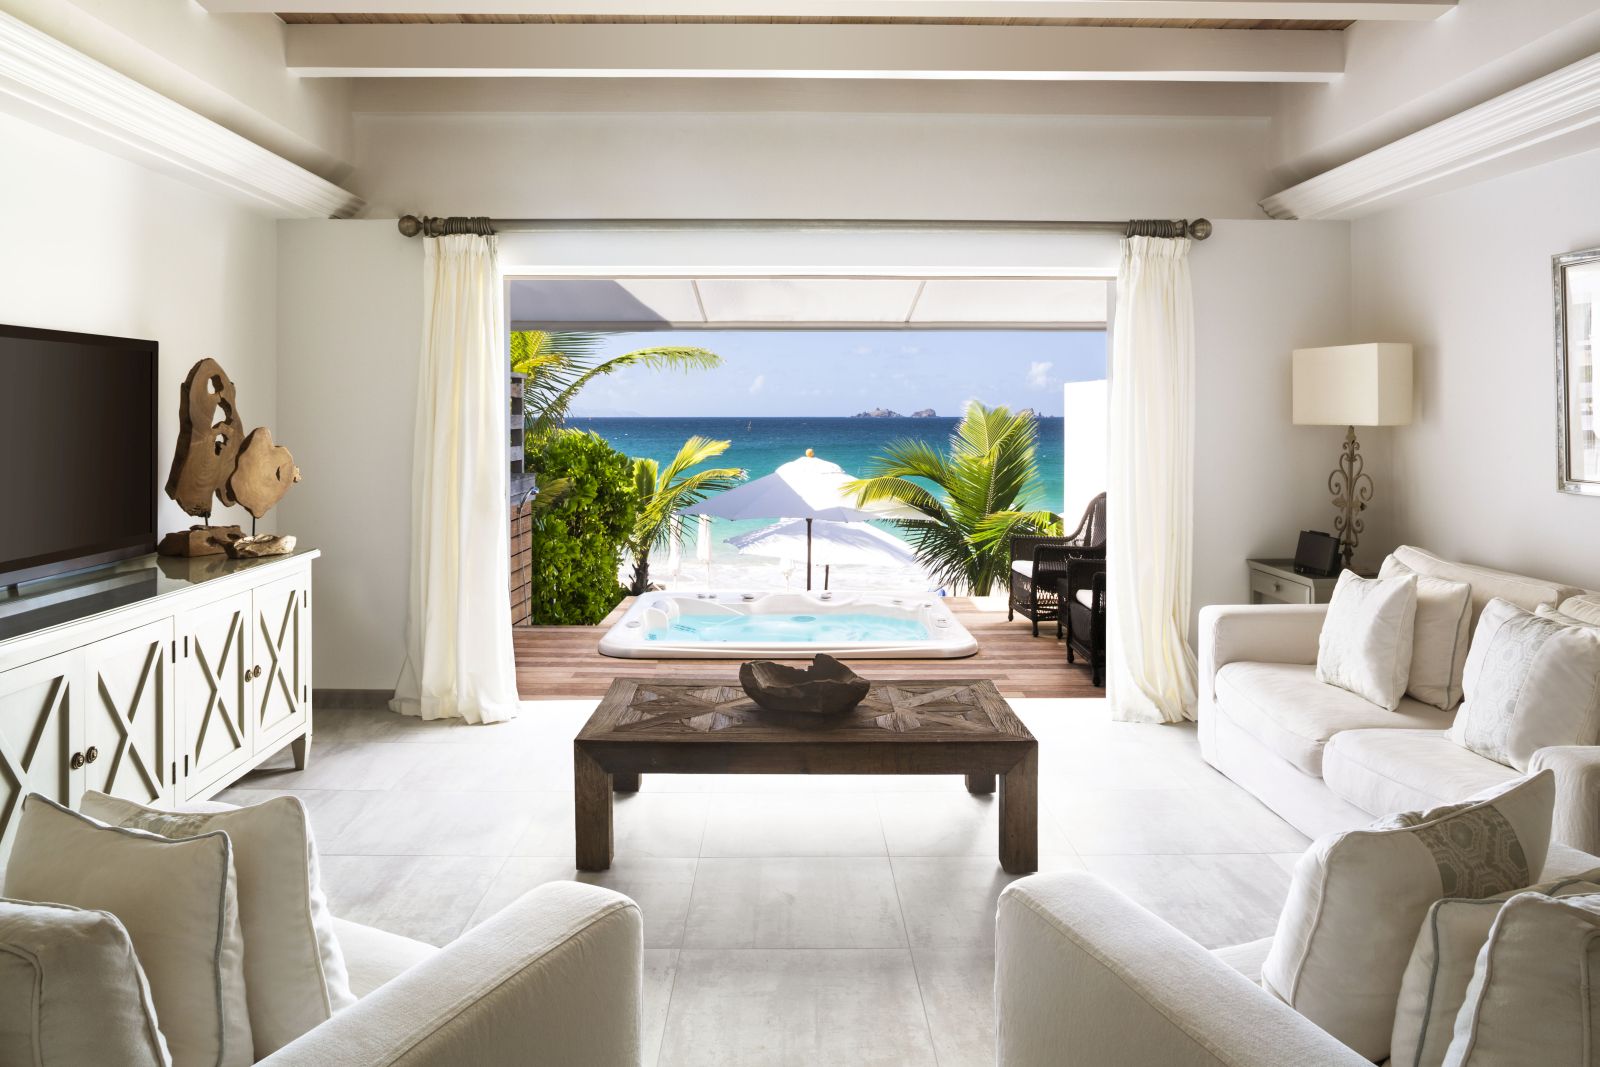 A living room suite with white furniture with a view out onto the beach at Hotel Cheval Blanc in St Barths